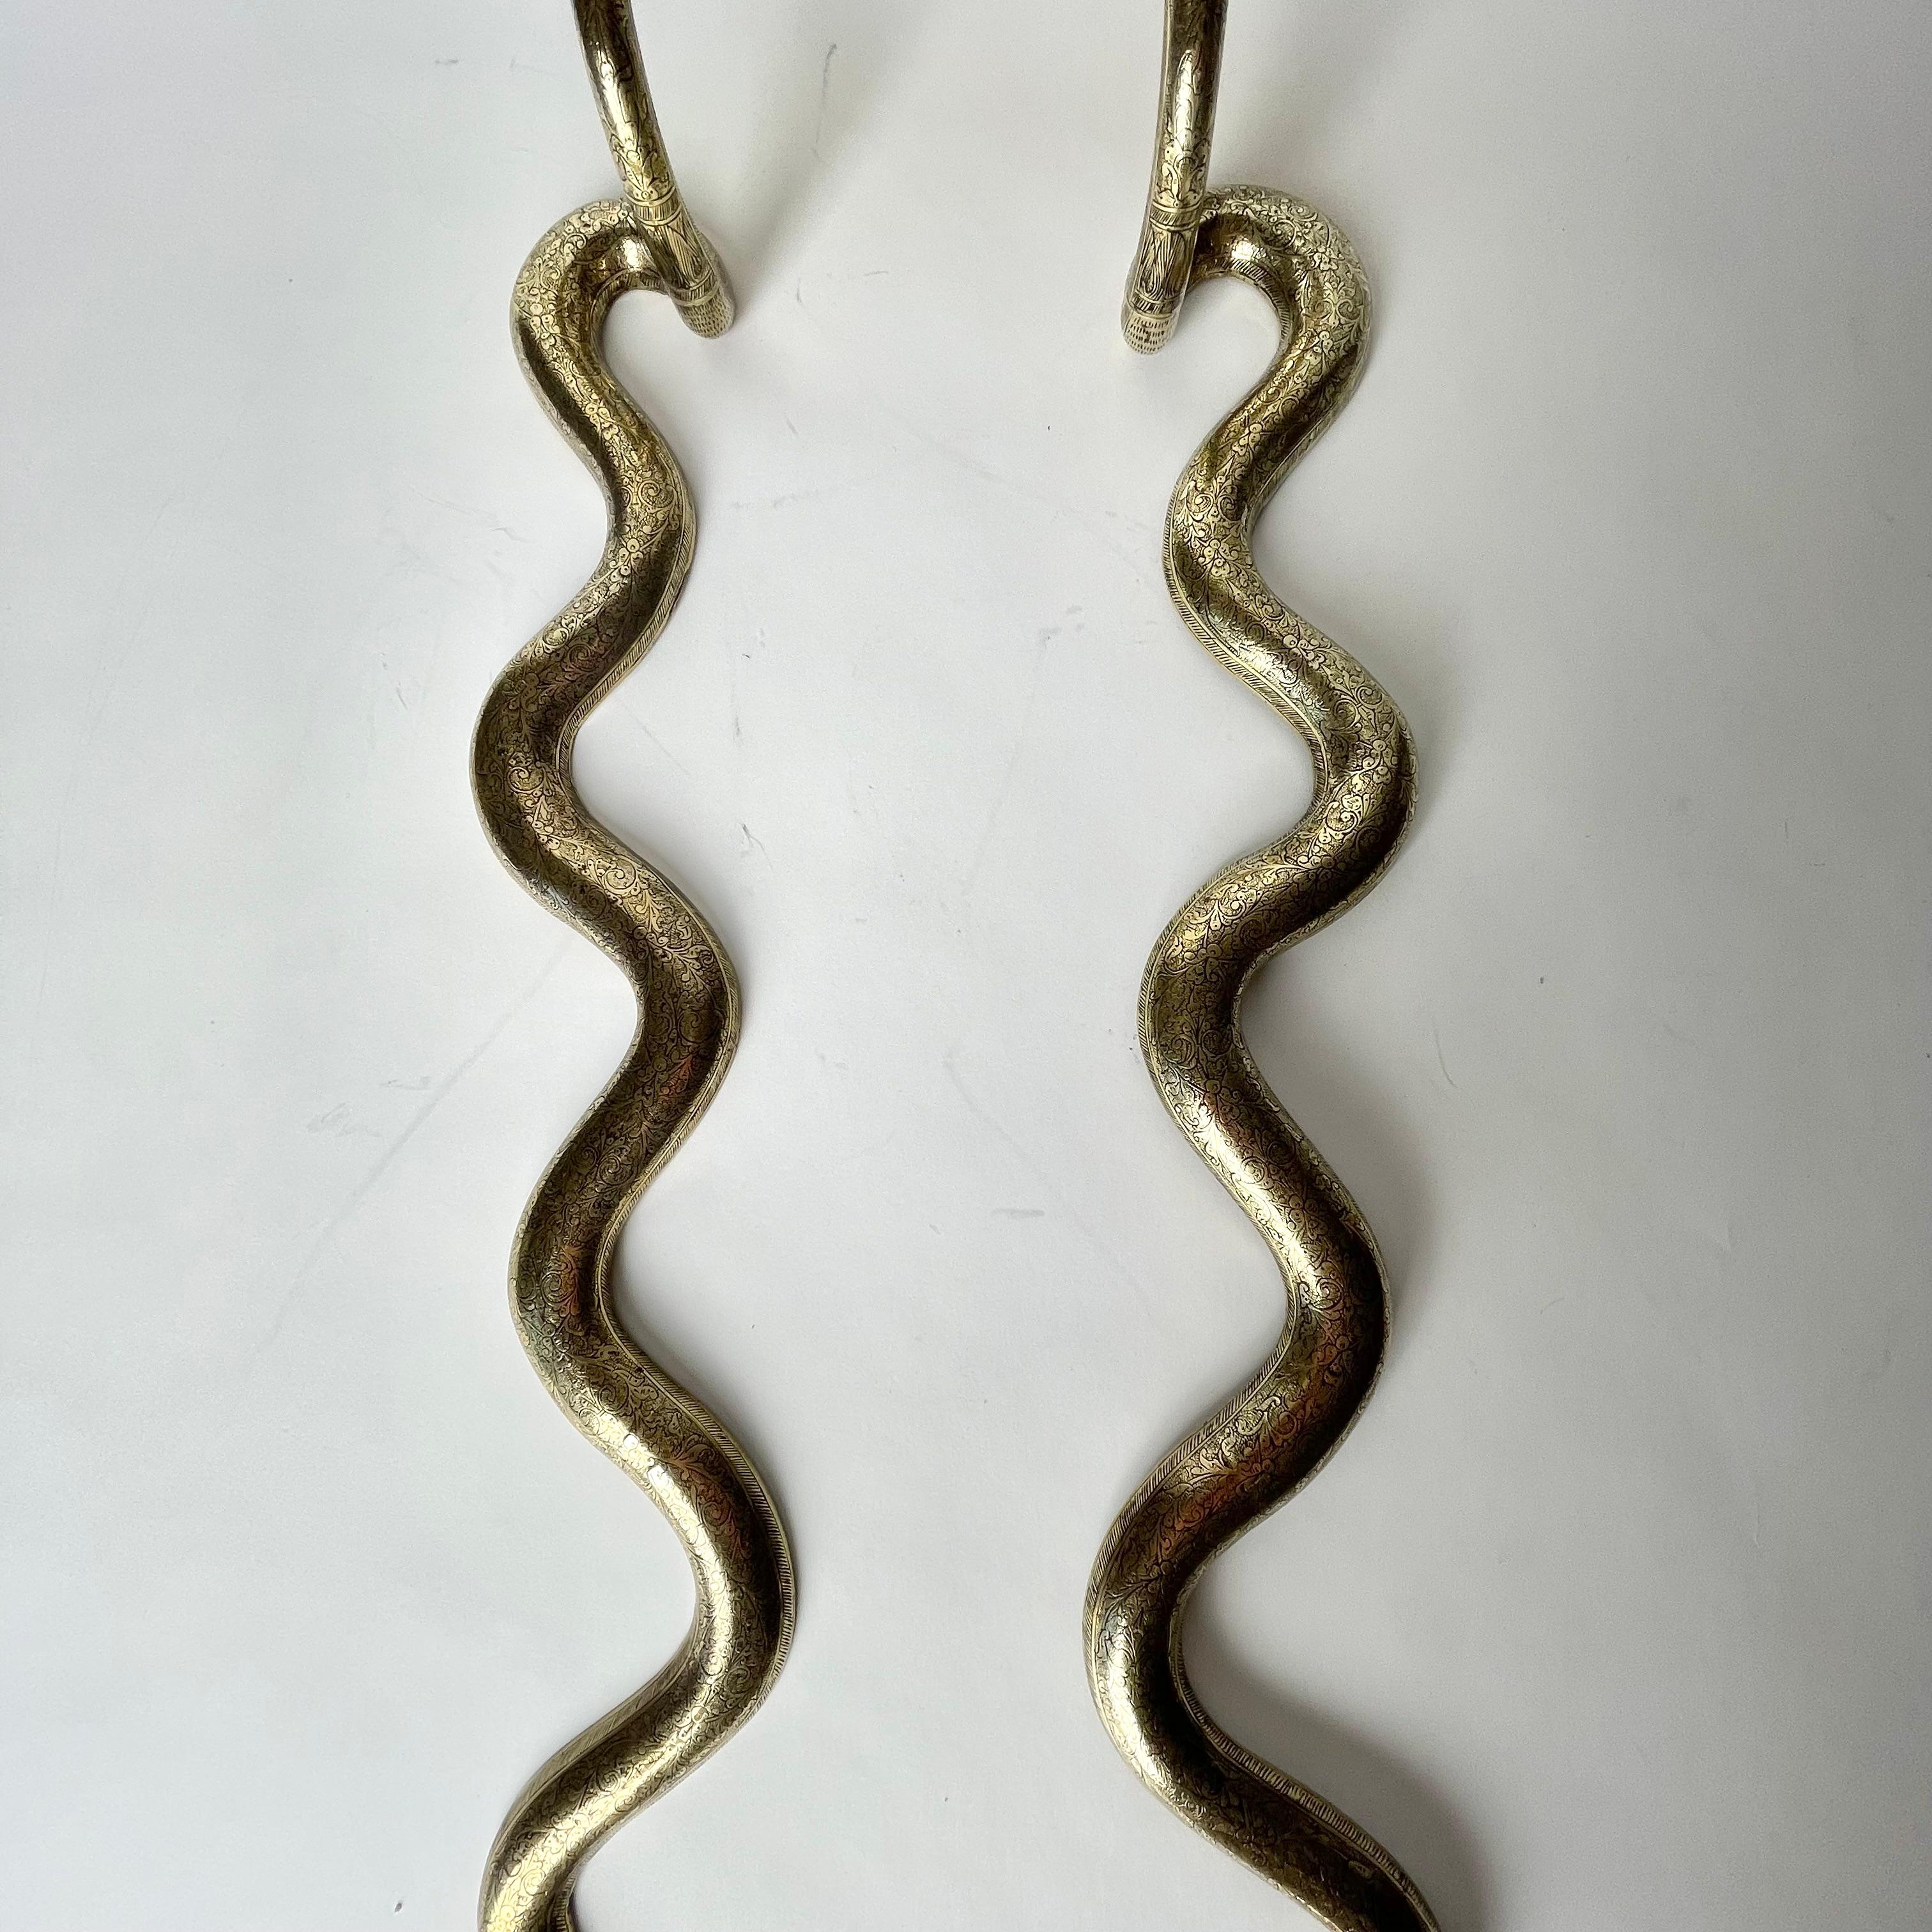 Pair of Wall Lights  in the Shape of a Cobra, Art Deco, 1920s-1930s In Good Condition For Sale In Knivsta, SE